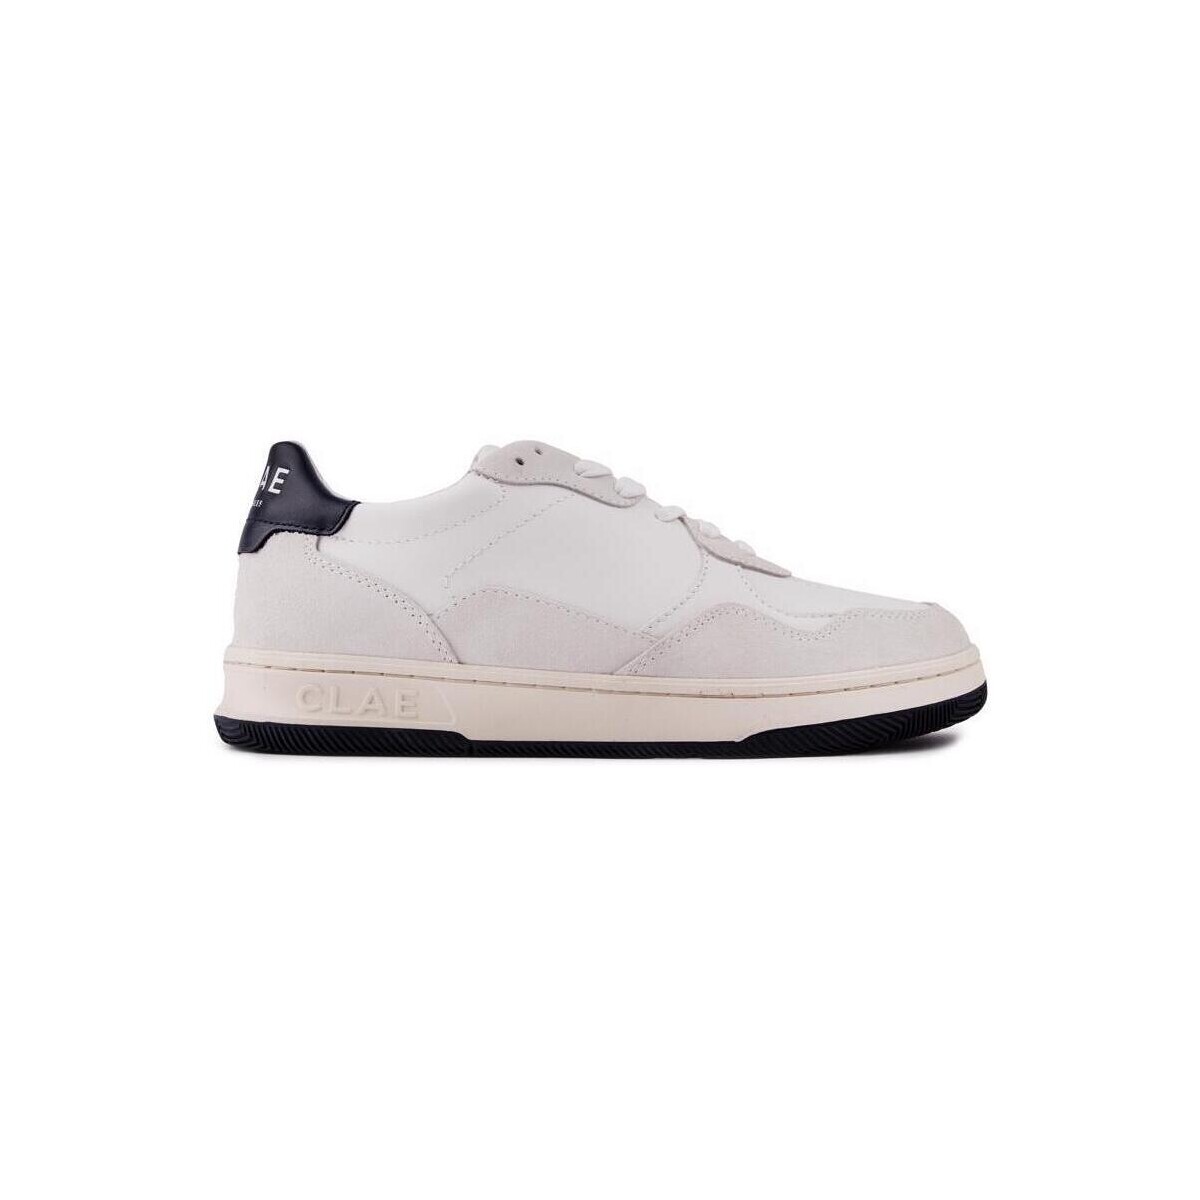 Chaussures Homme Walk In Pitas Elford Formateurs De Cour Blanc